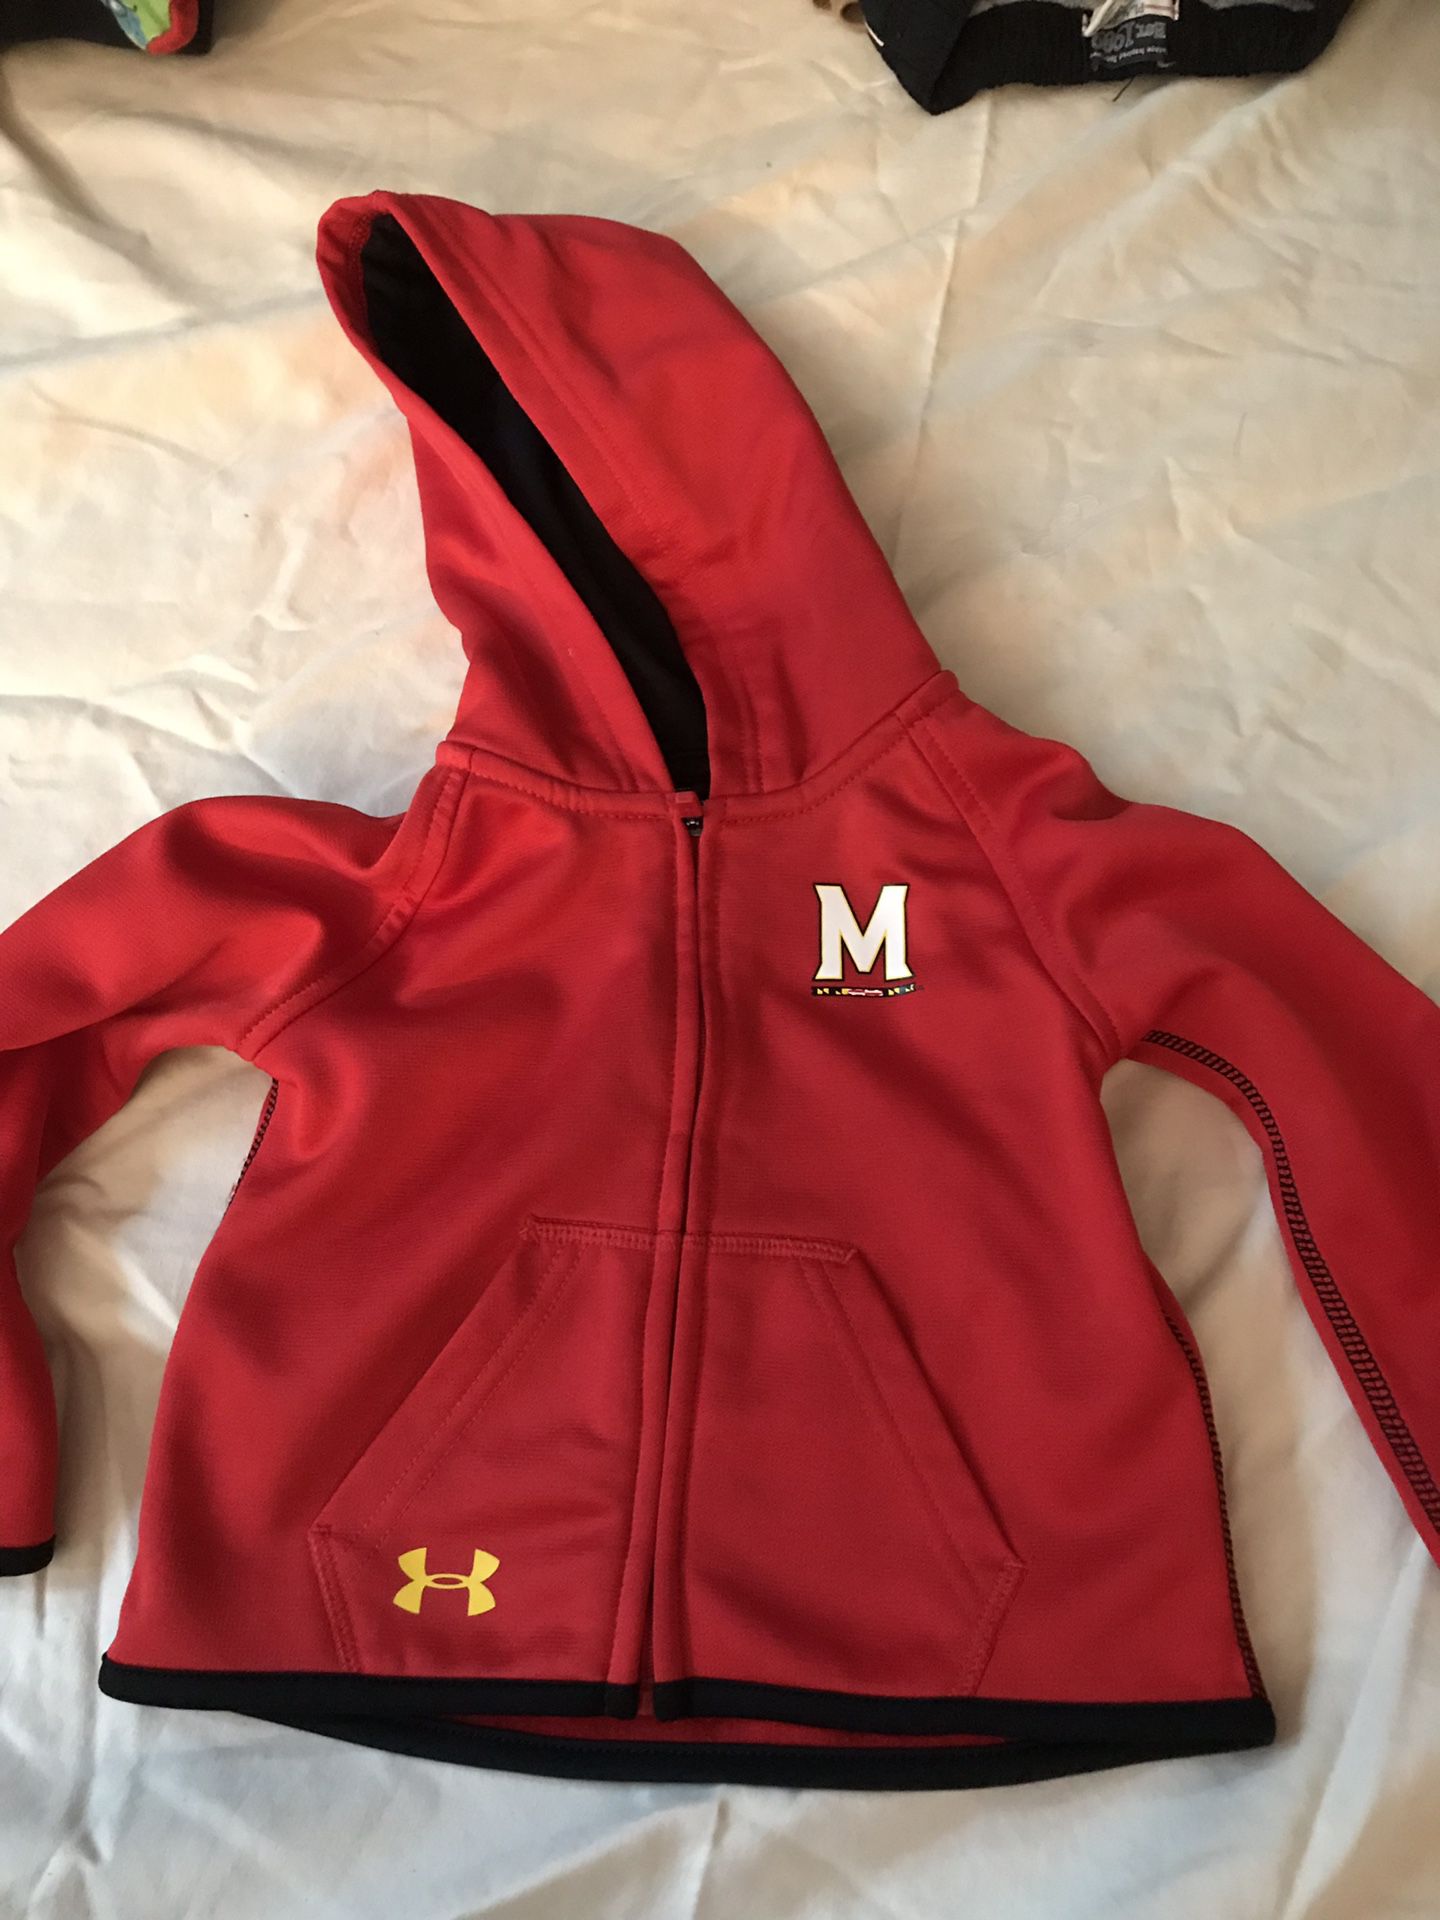 18 month size Under Armour Maryland jacket